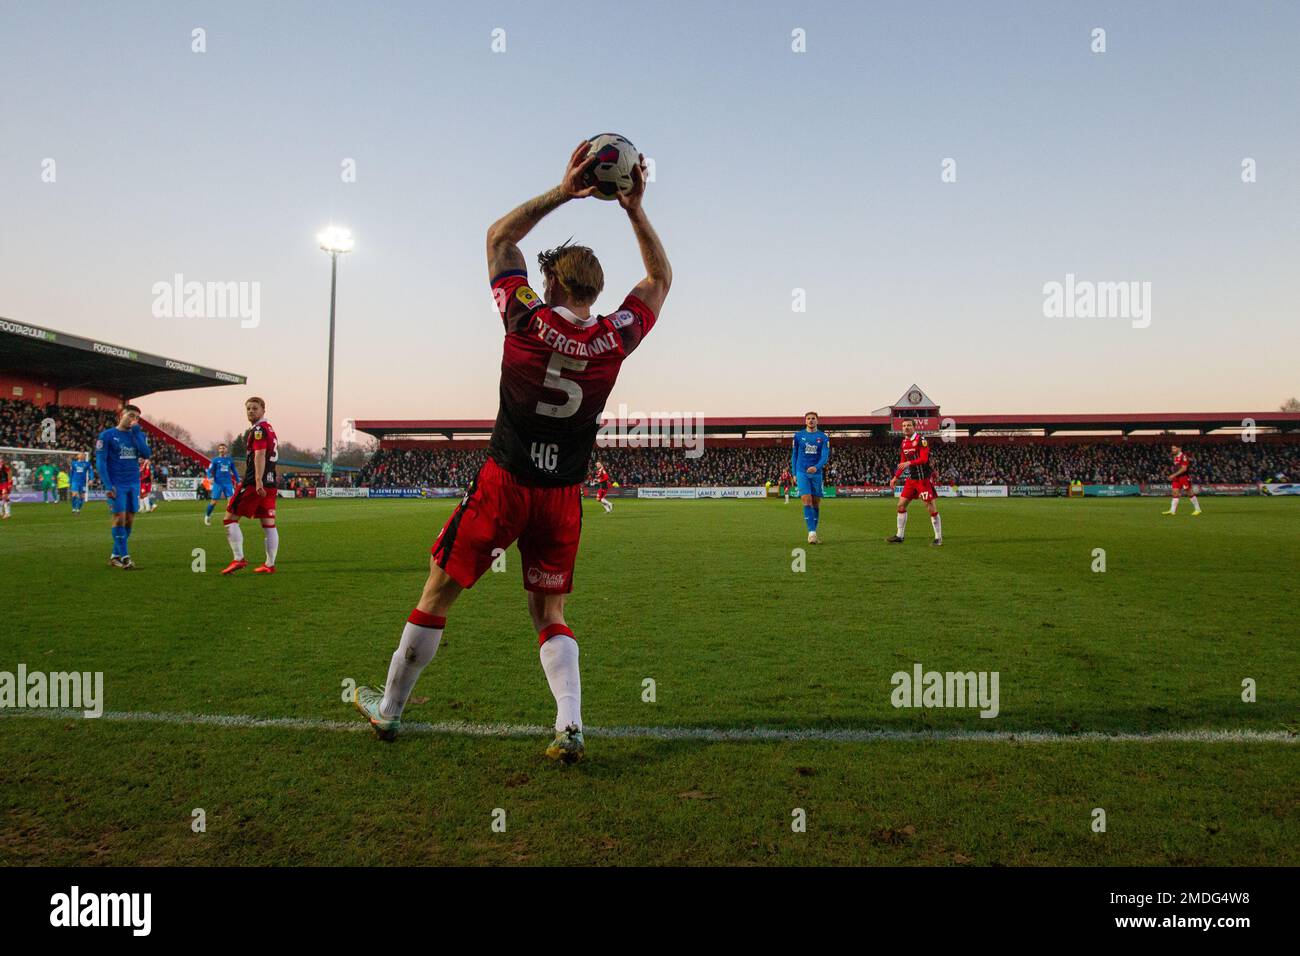 Football player taking throw in during lower league match Stock Photo